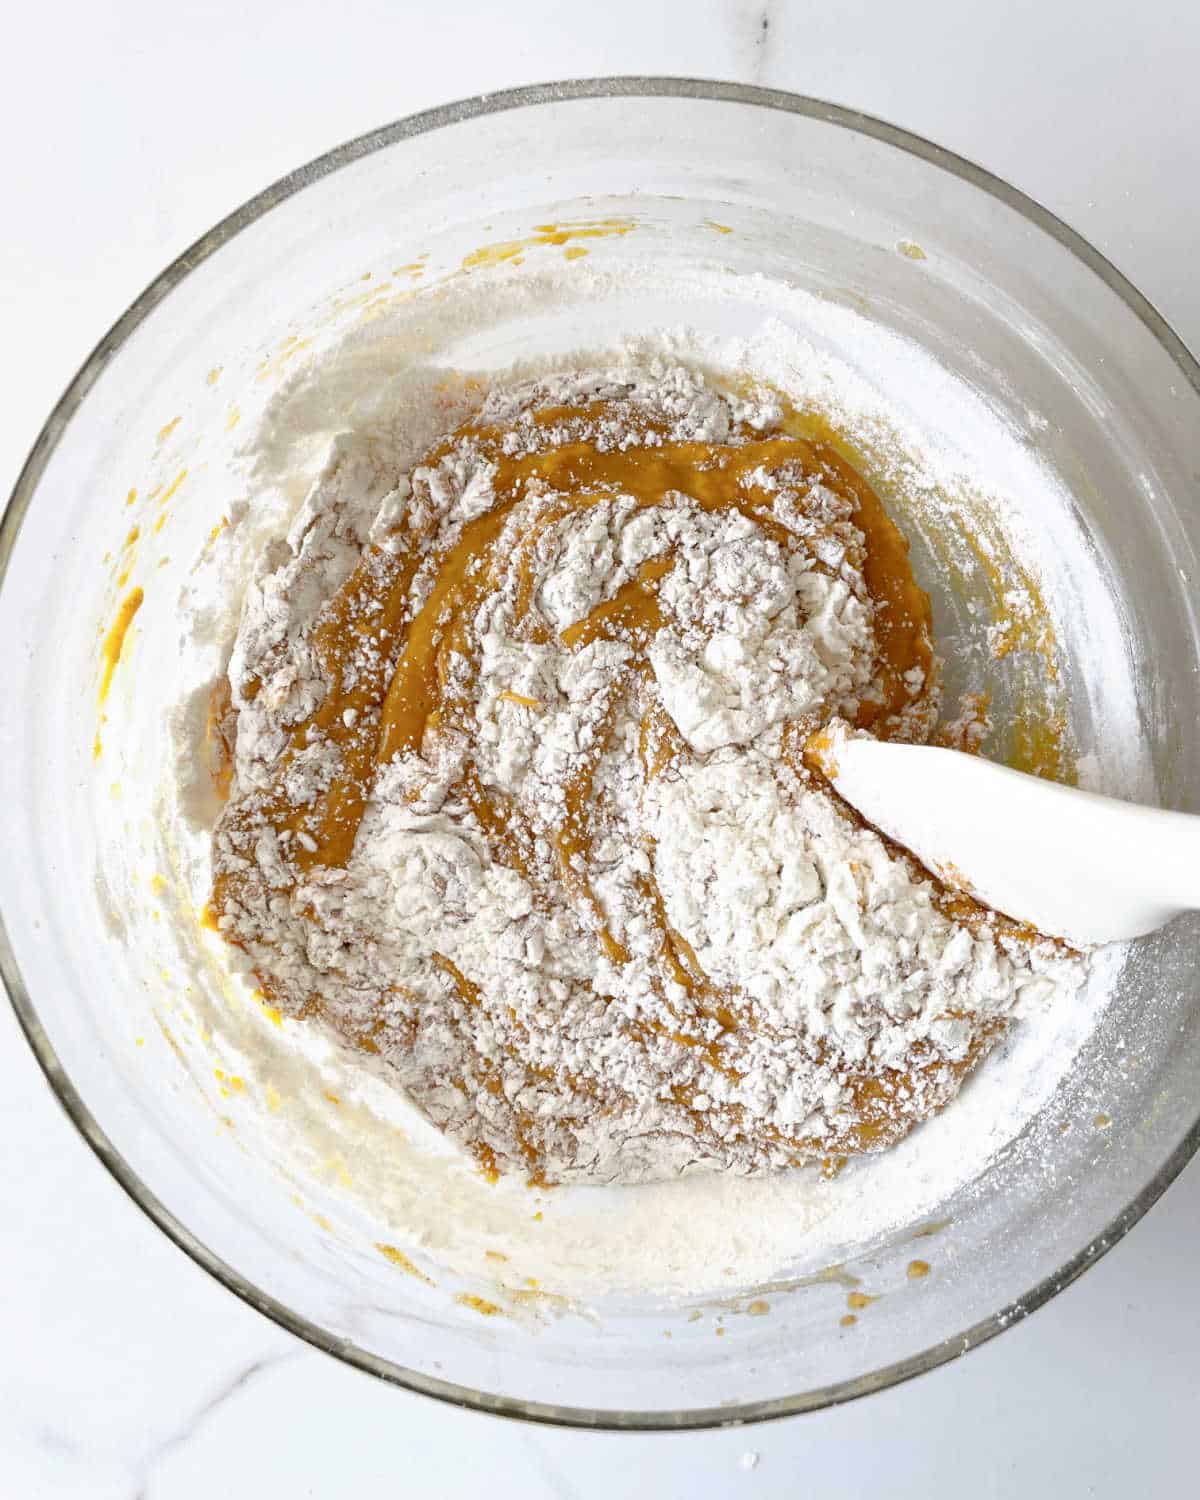 Mixing flour with pumpkin cake batter in a glass bowl with a white spatula. White marble surface.